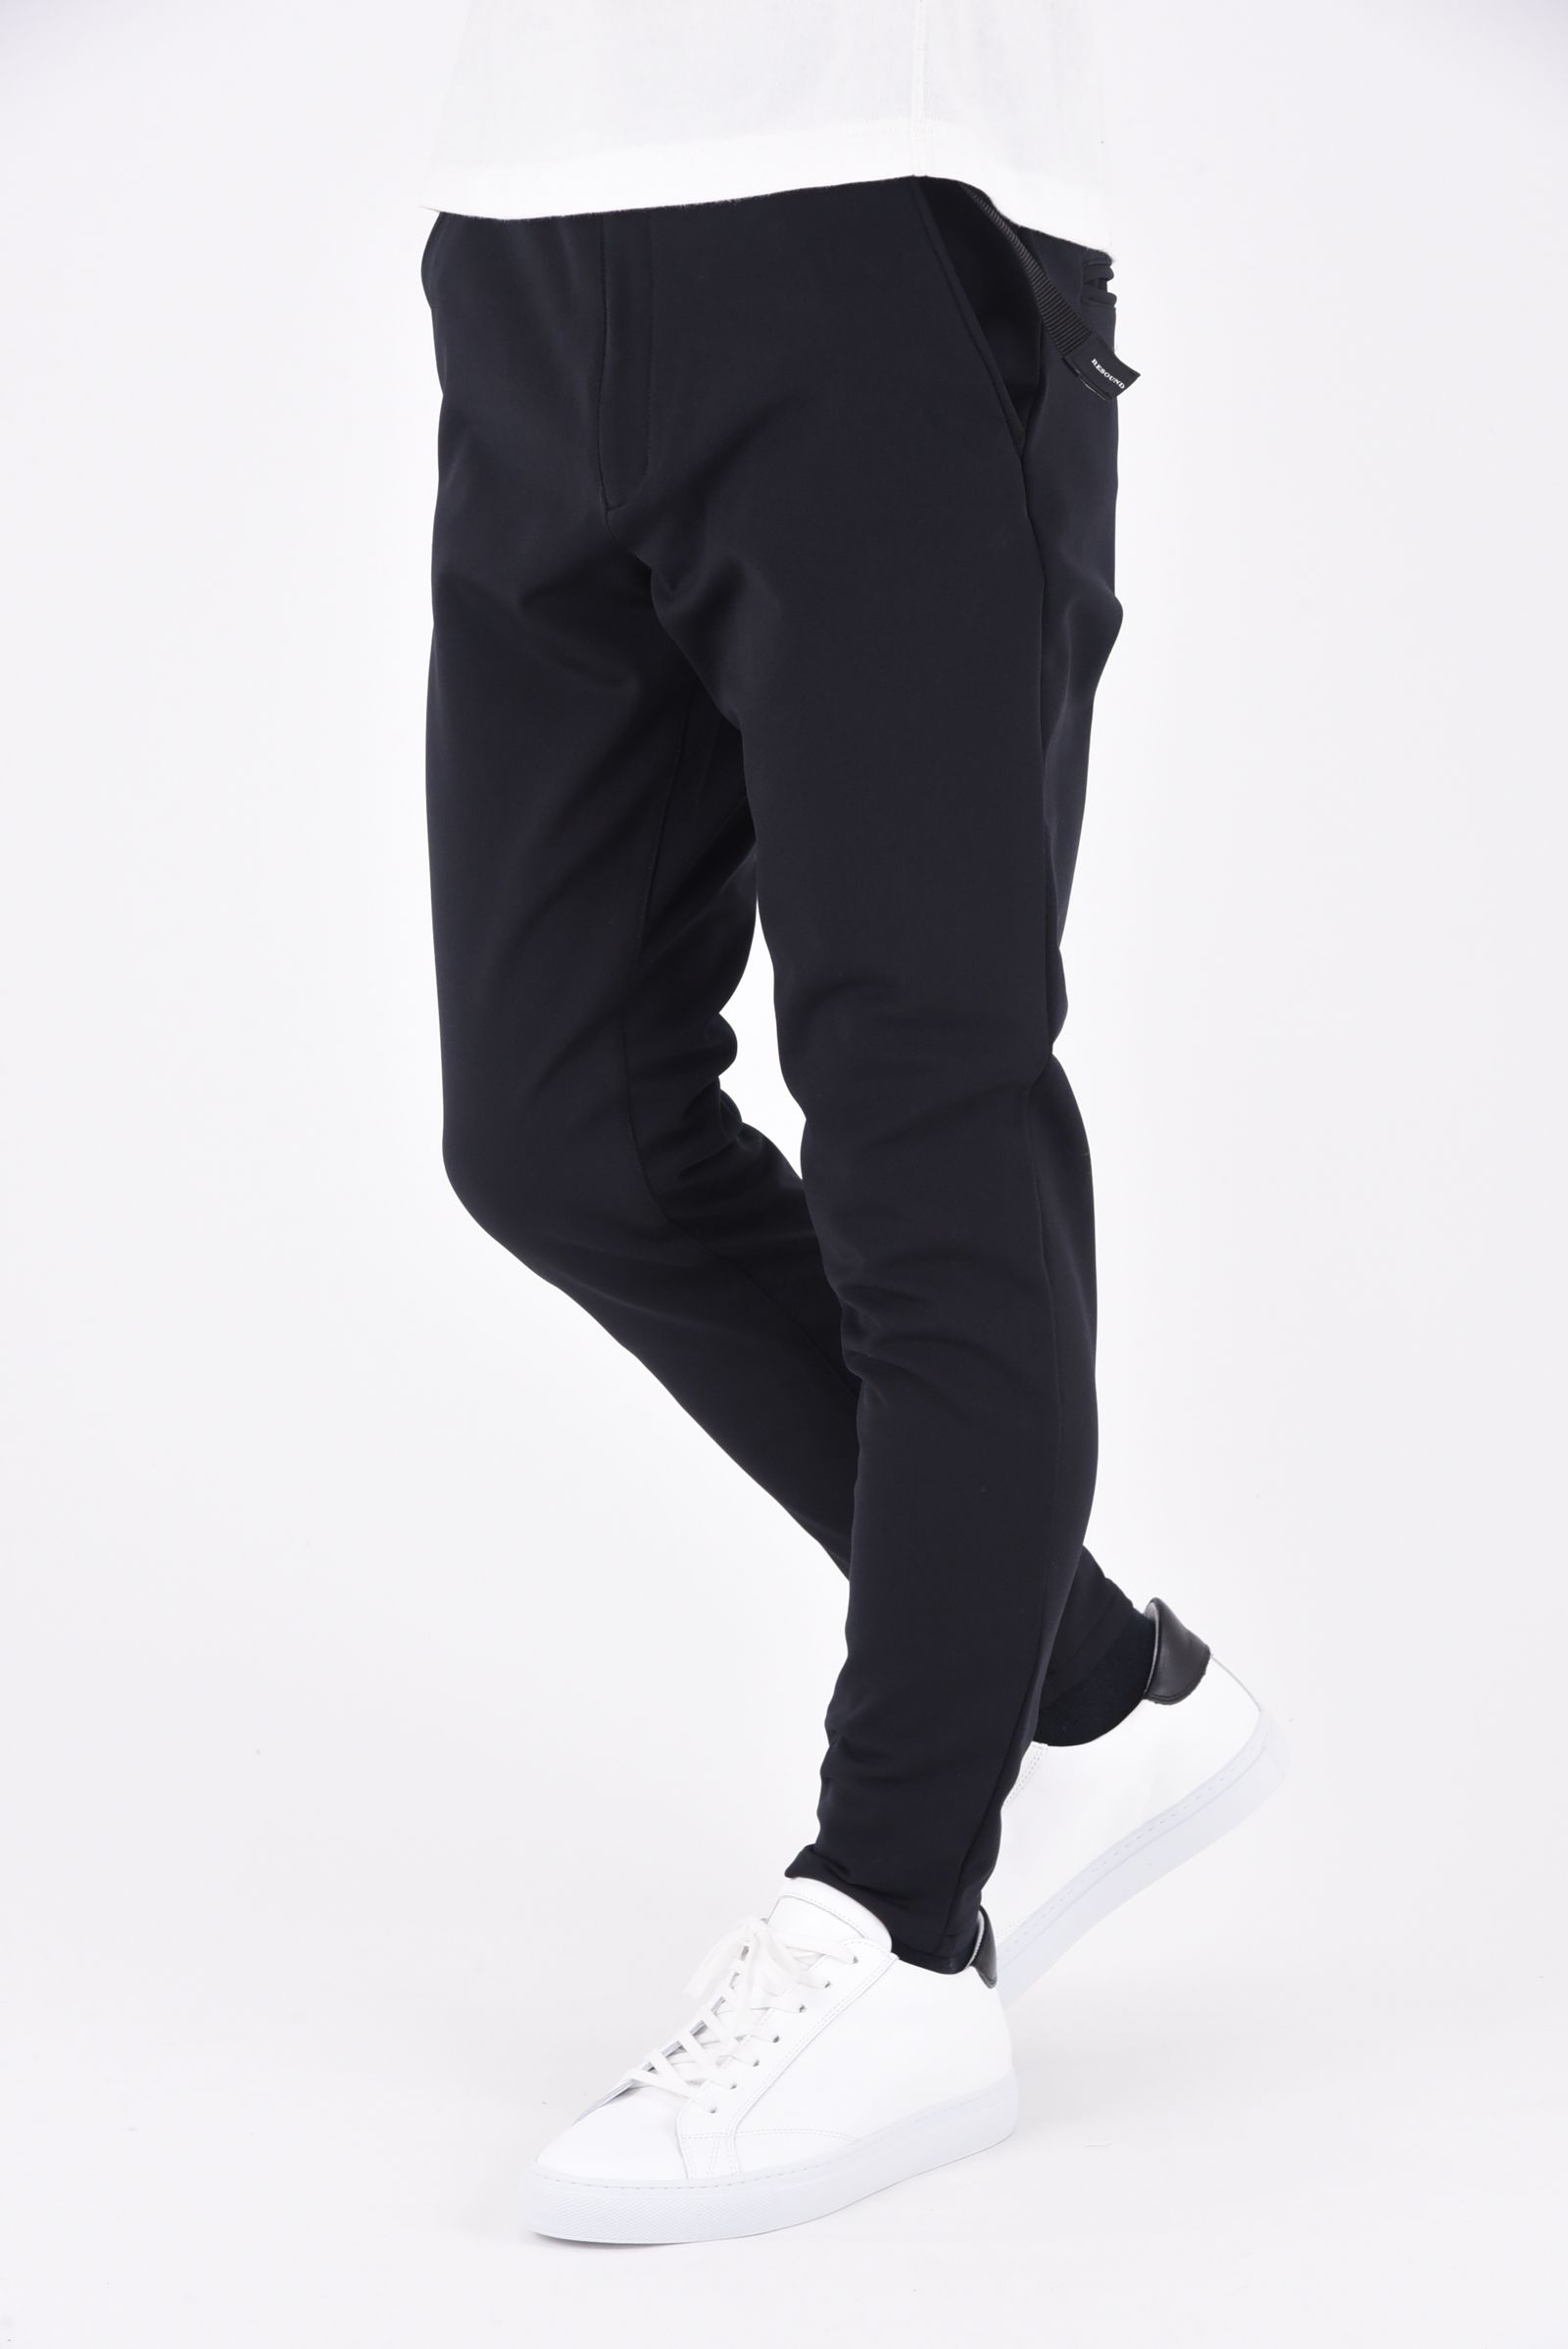 RESOUND CLOTHING - PAT TIGHT EASY PANTS / ストレッチツイル 裏起毛